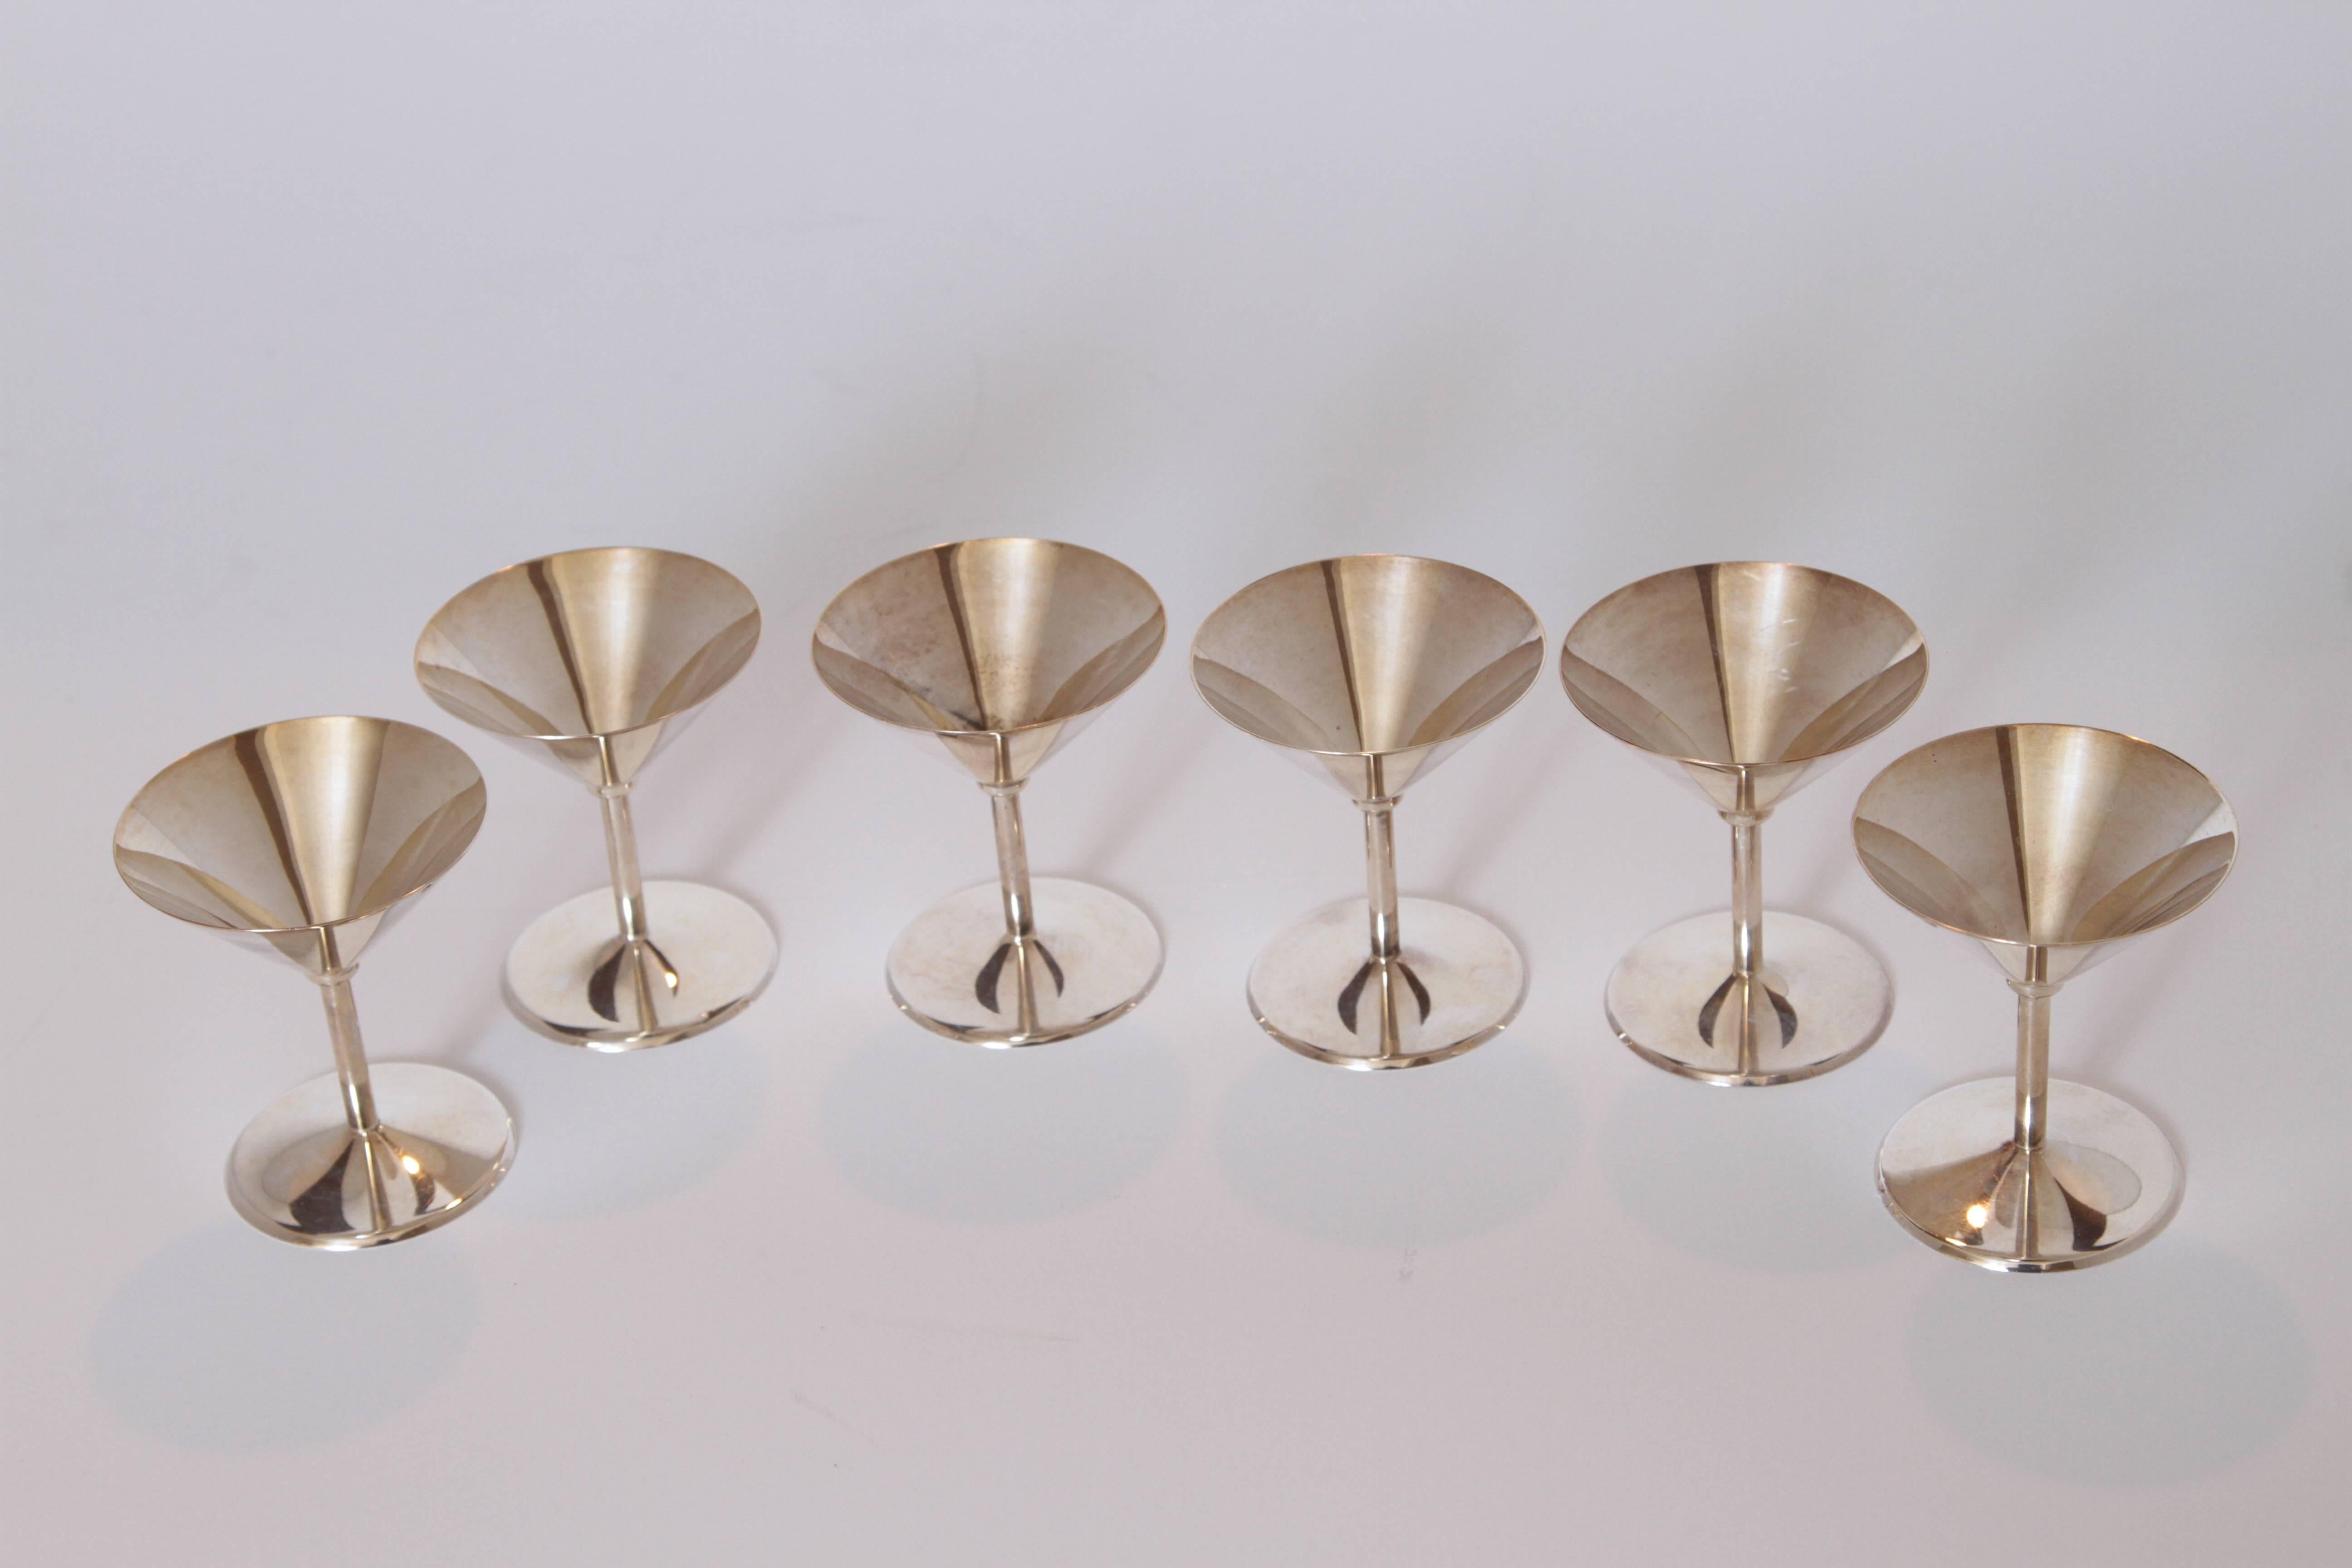 Machine Age Art Deco Silver Plate Cocktail Set by WMF Germany 1